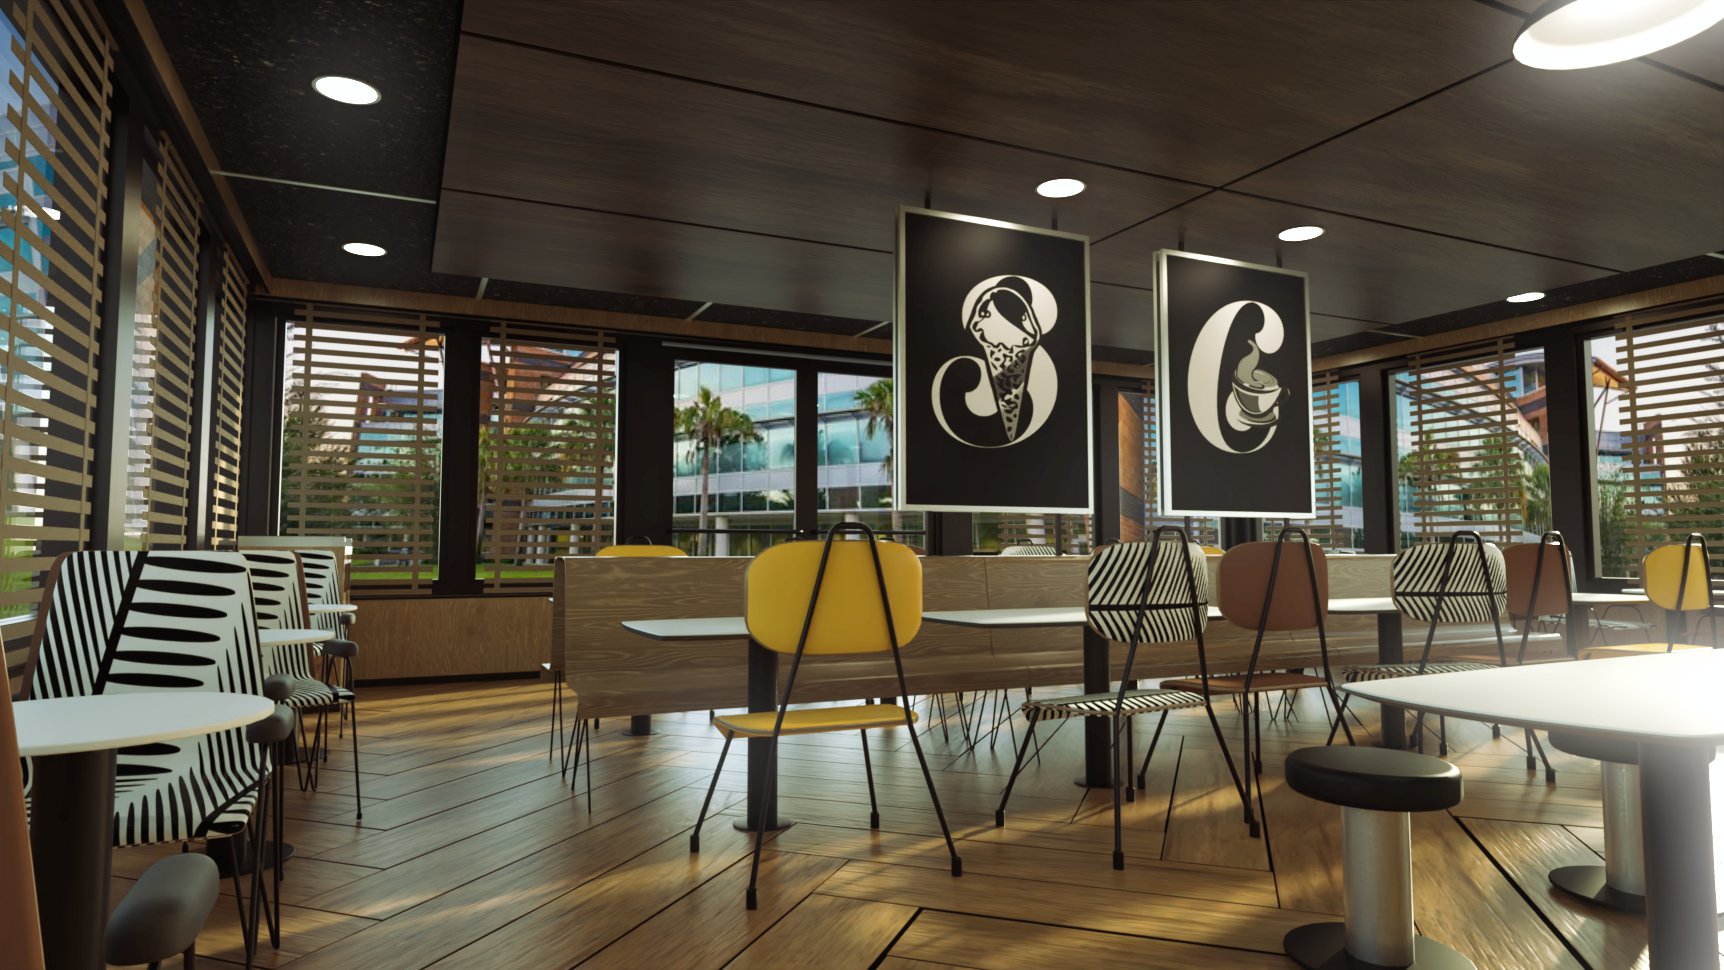 Office Cafeteria by: Digitallab3D, 3D Models by Daz 3D